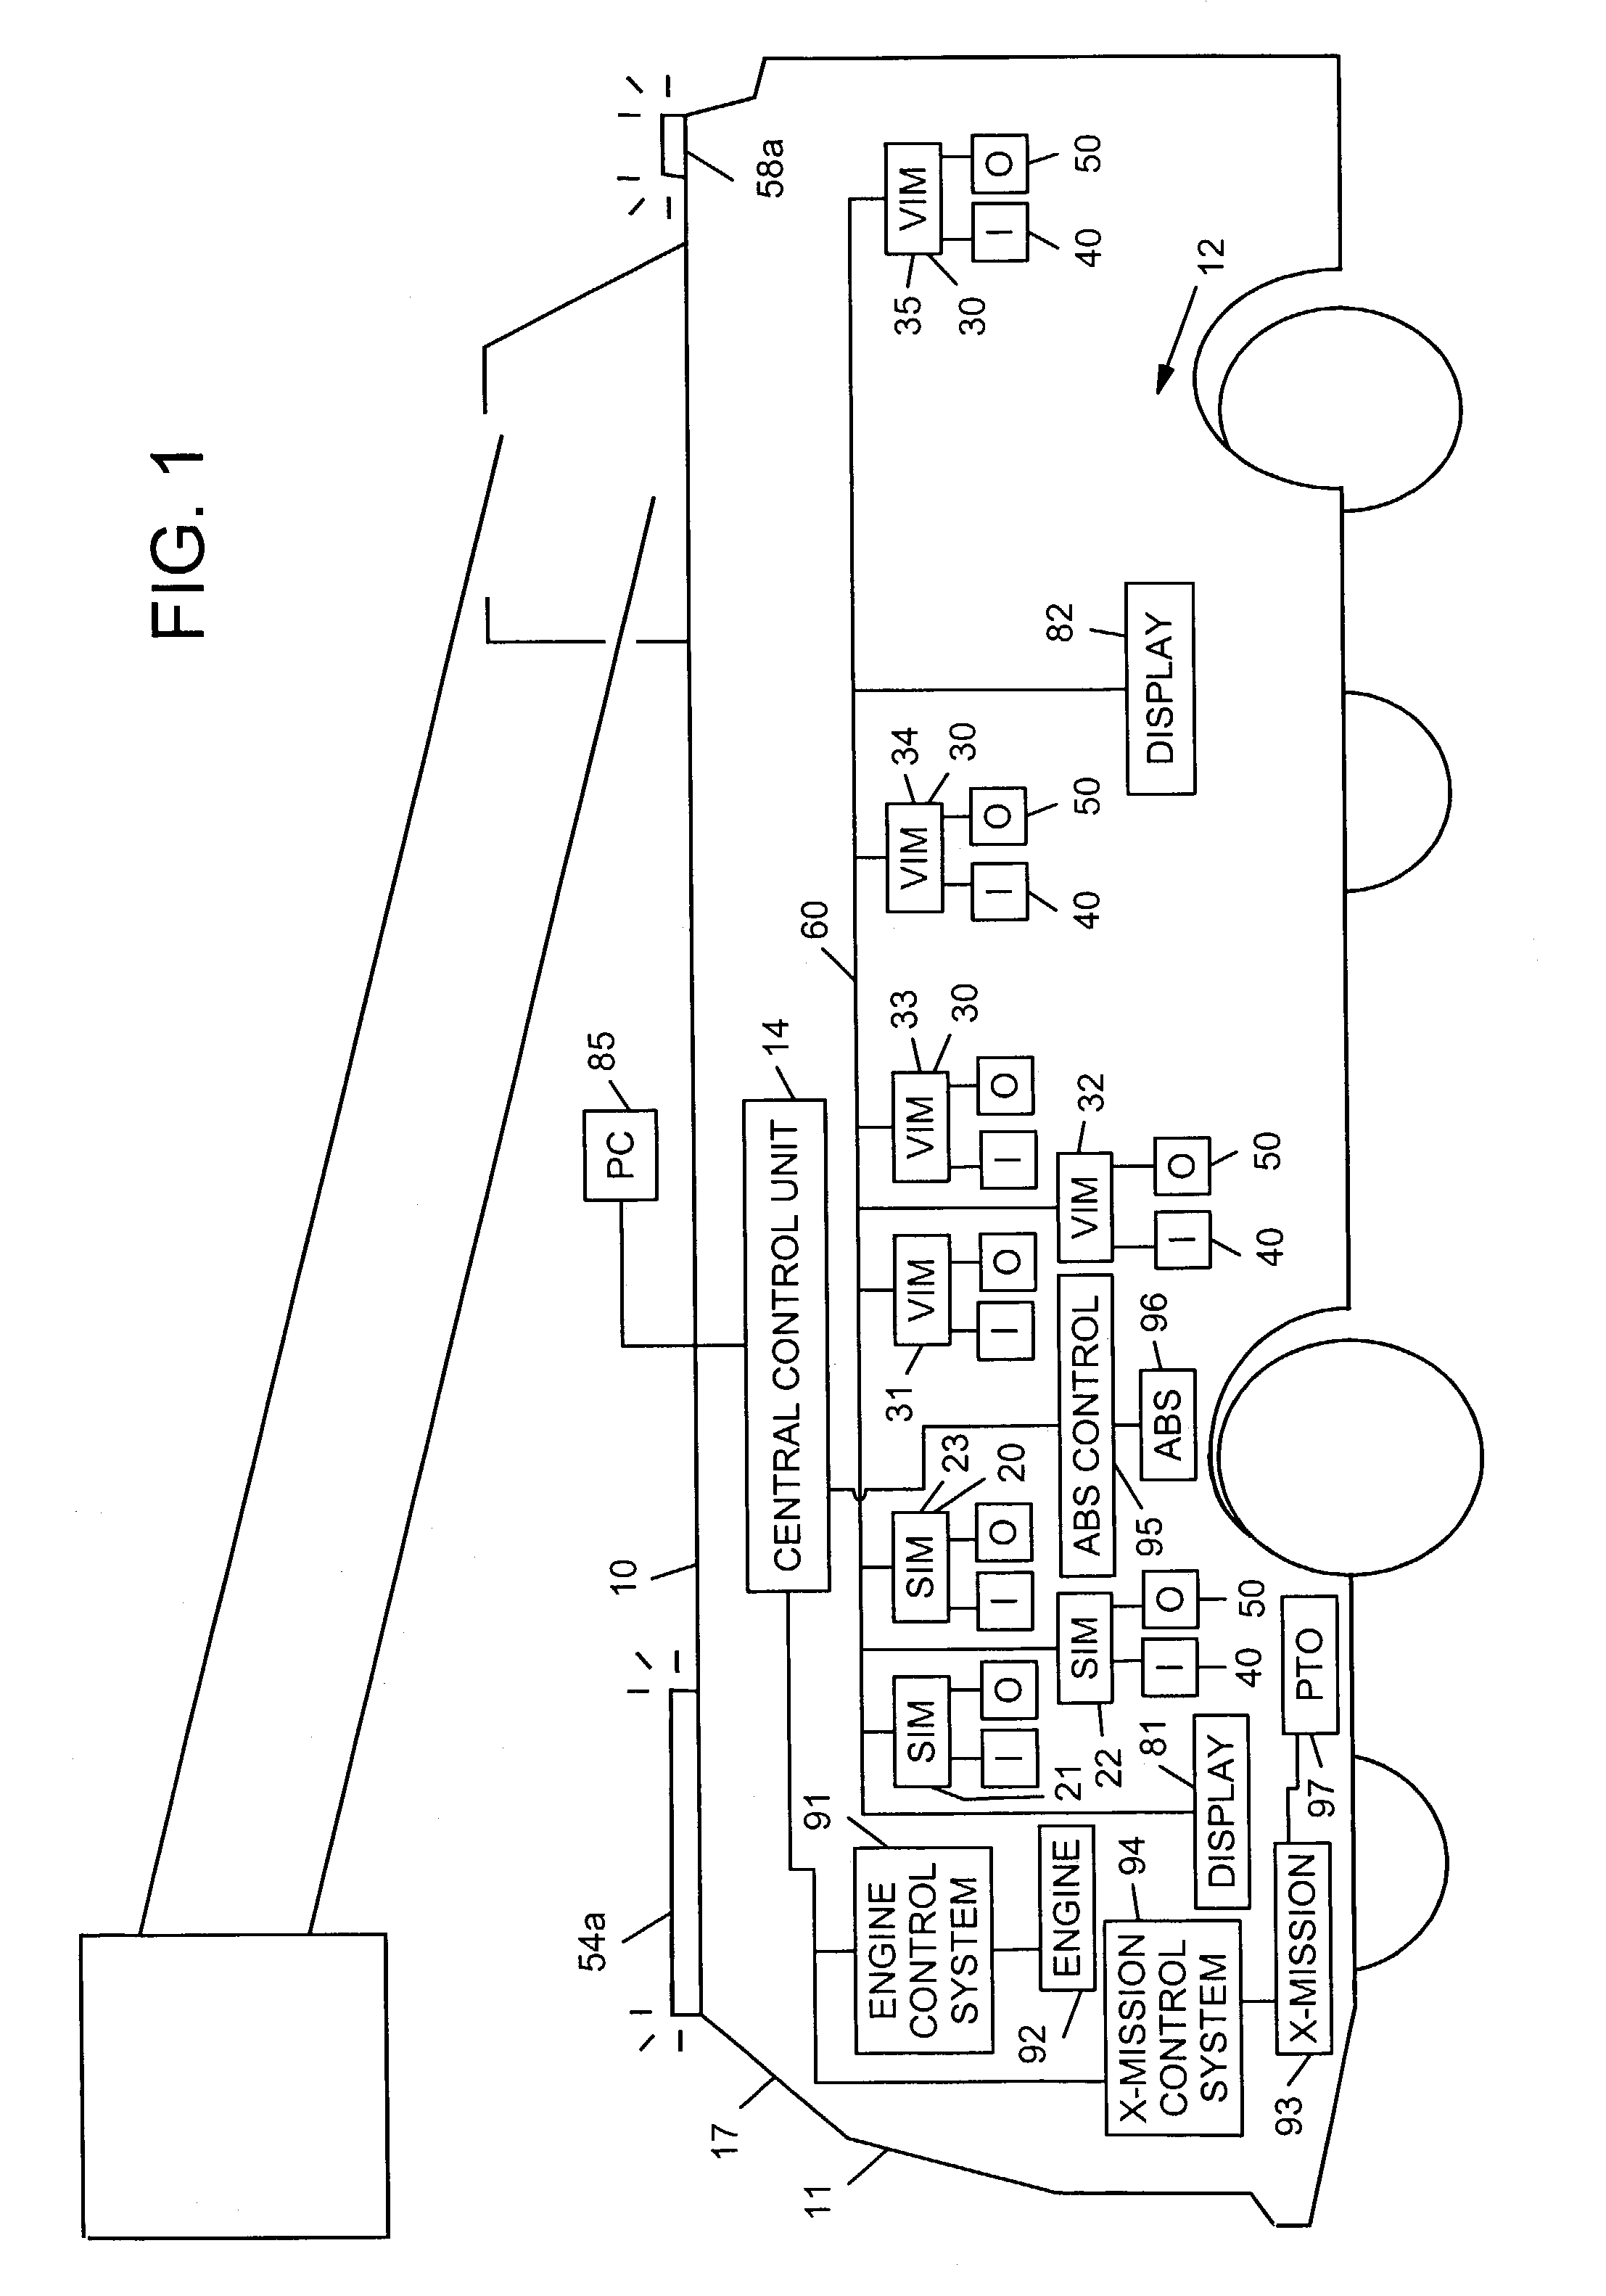 Turret operator interface system and method for a fire fighting vehicle